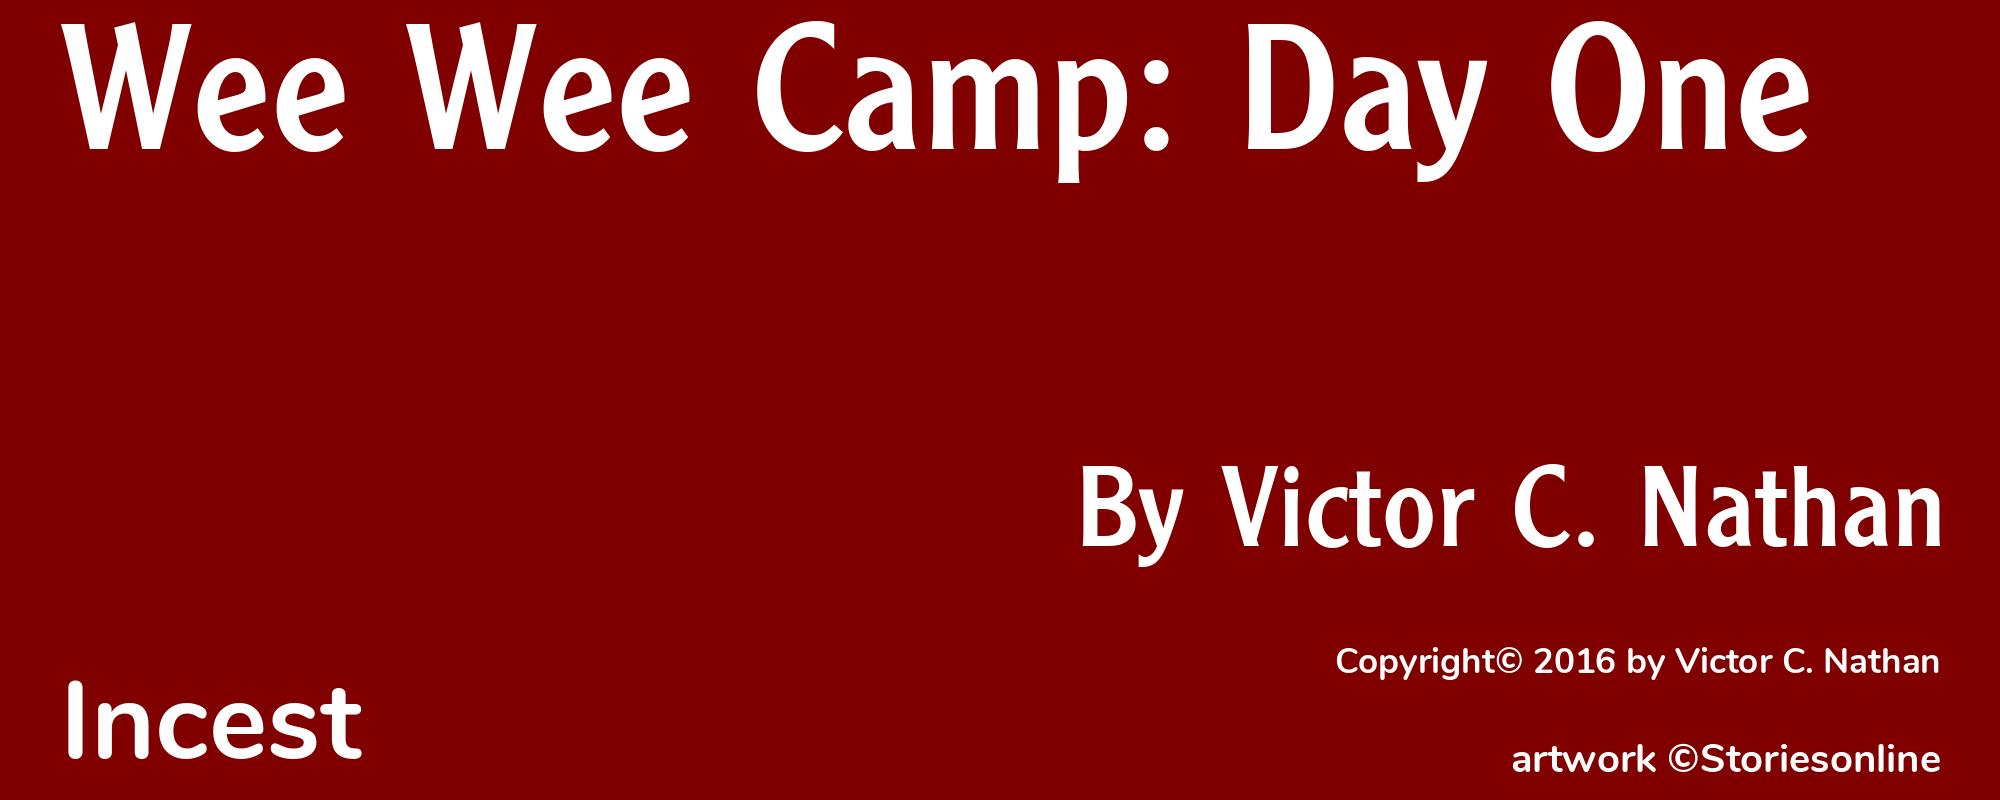 Wee Wee Camp: Day One - Cover